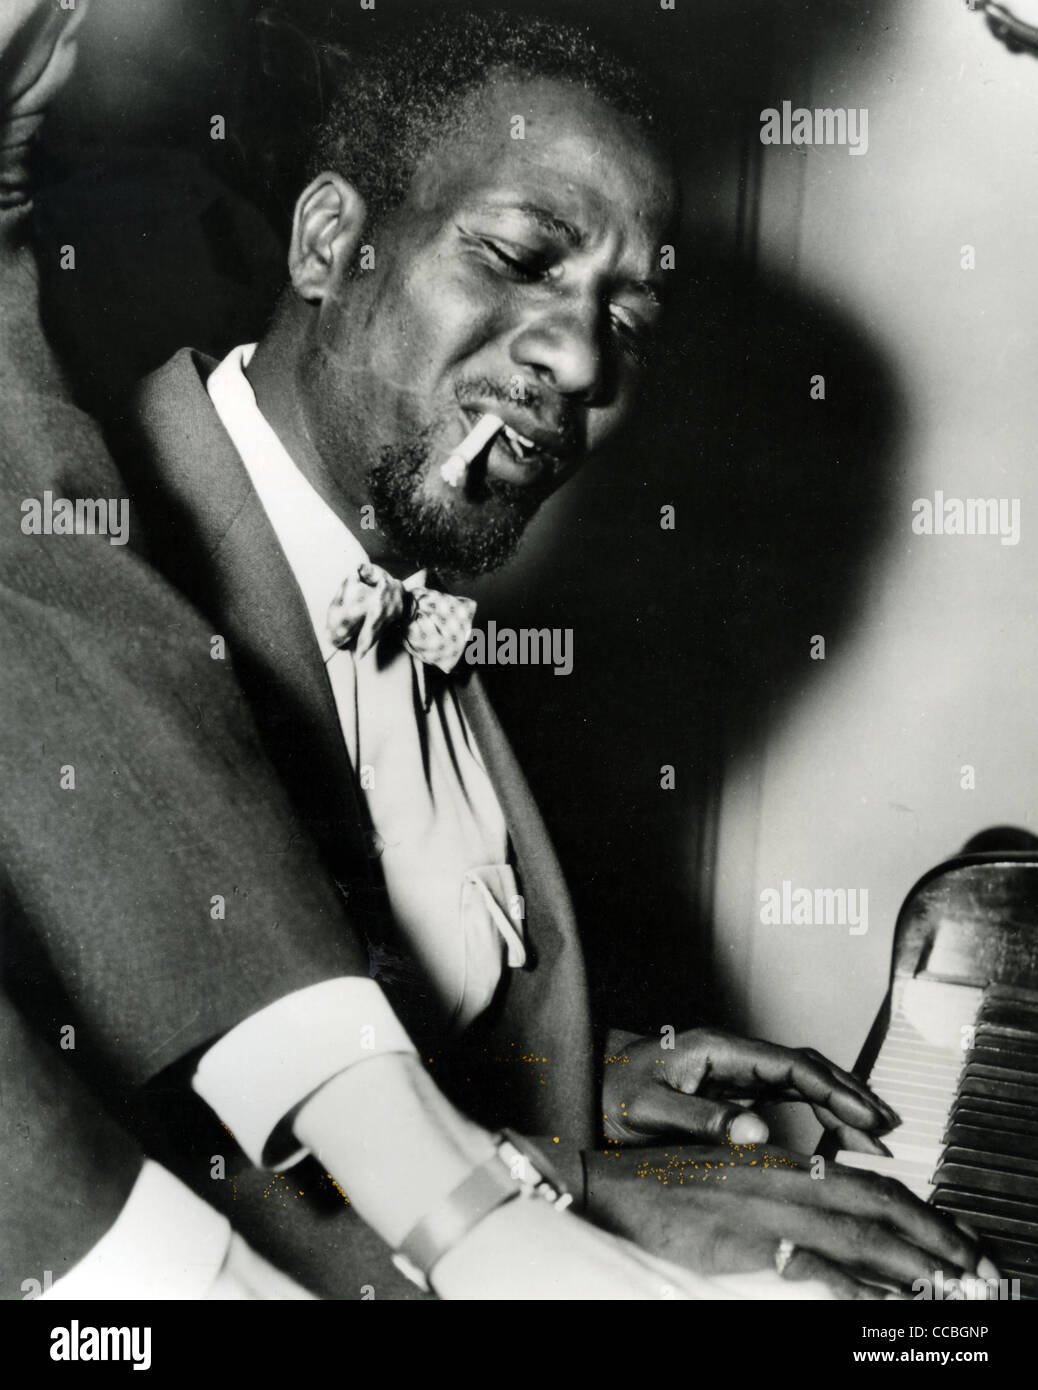 THELONIOUS MONK (1917-1982) US jazz pianist and composer Stock Photo